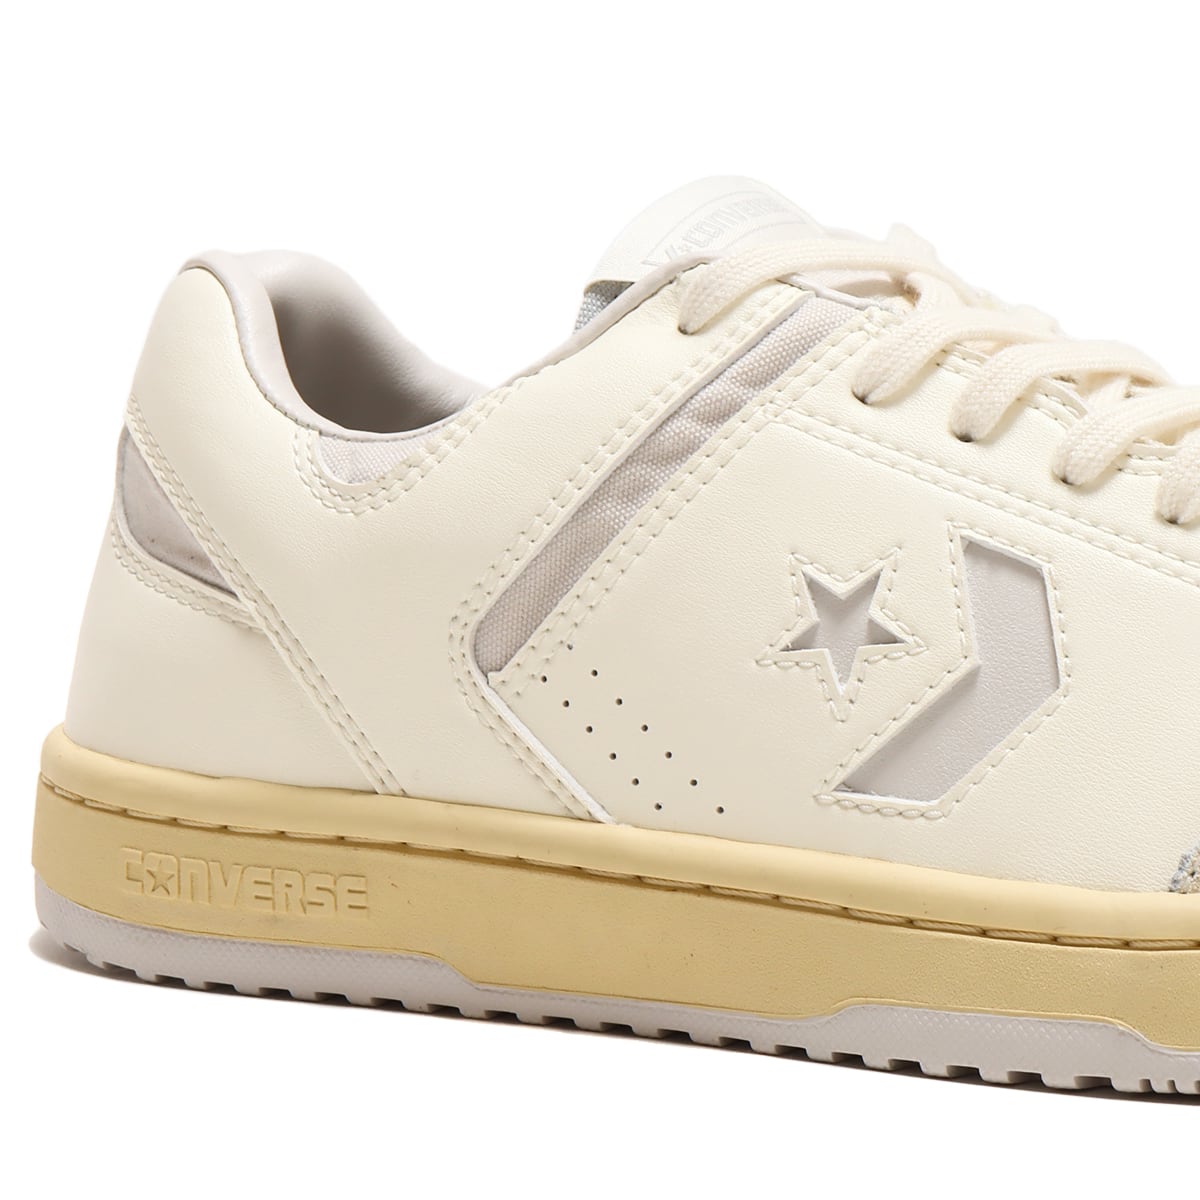 CONVERSE WEAPON SK OX WHITE/LIGHT GRAY 23SS-I